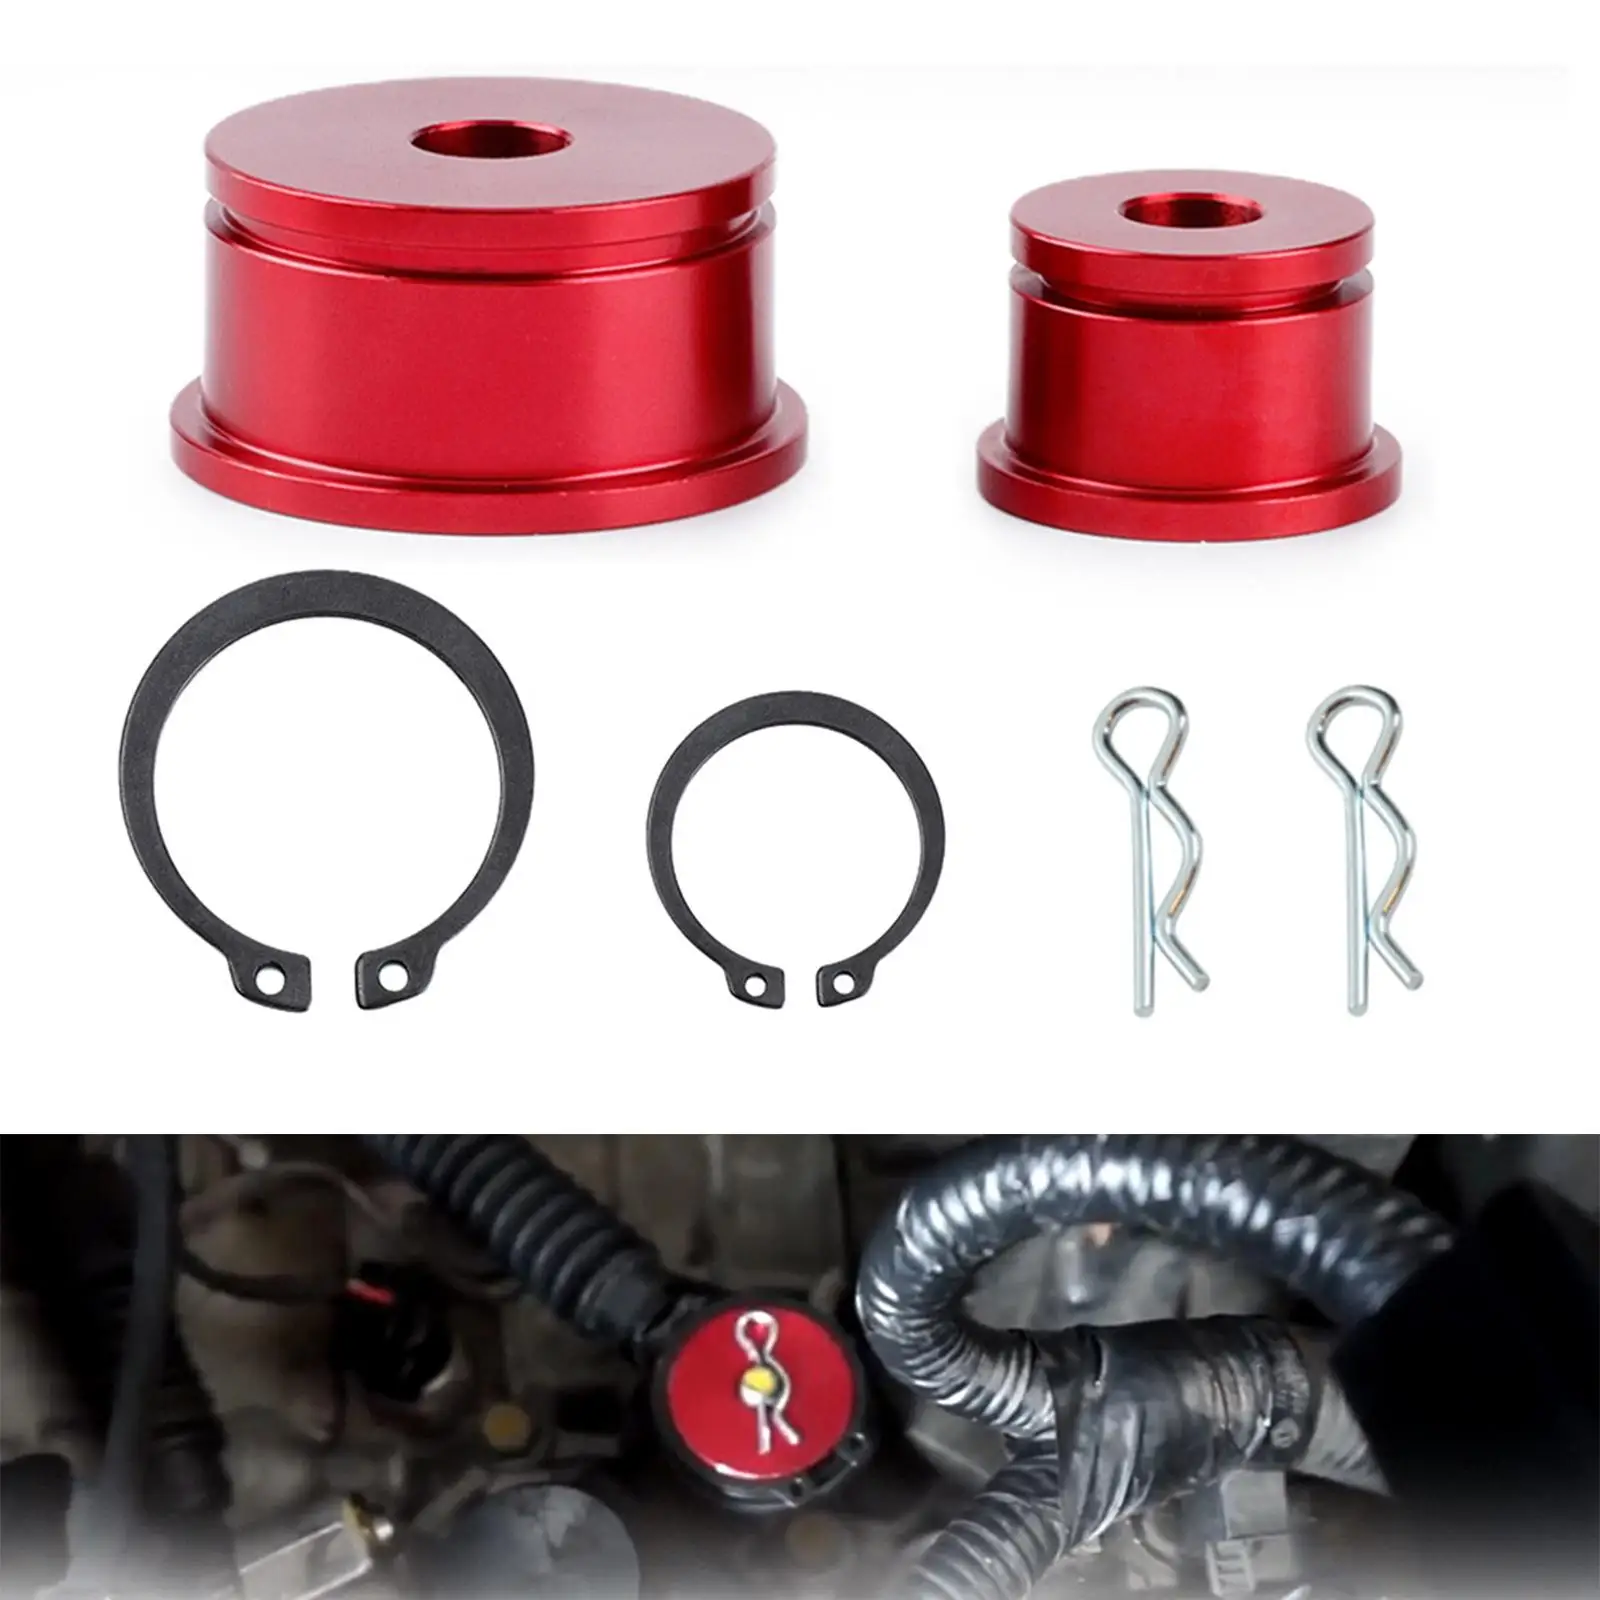 Shifter Cable Bushings Kit Fits for Mitsubishi Evolution VII iX Spare Parts Accessories